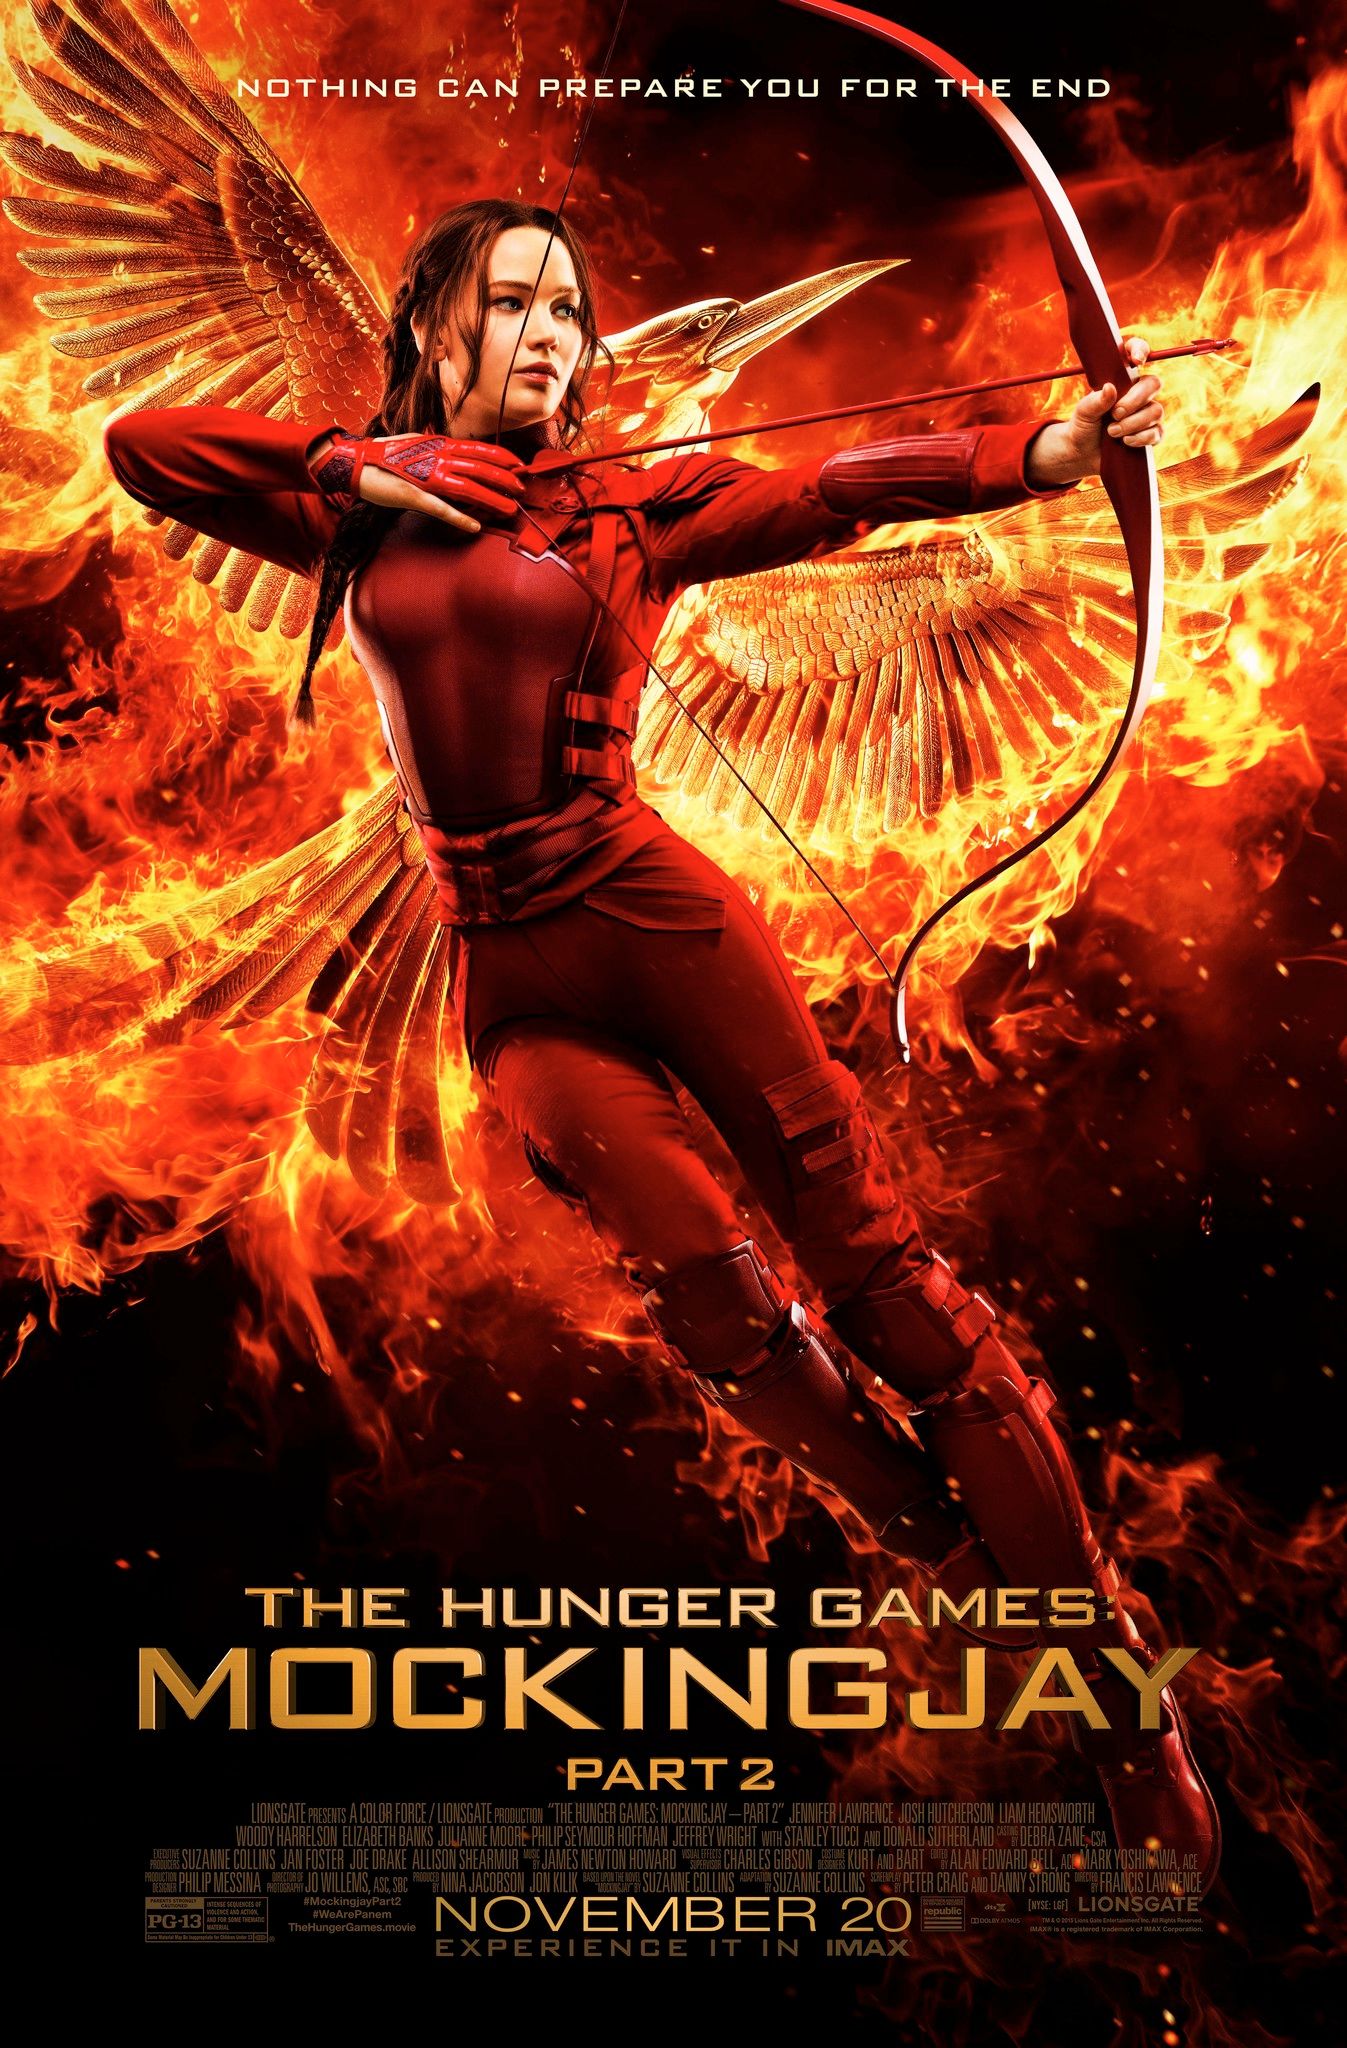 How To Watch All The Hunger Games Movies In Chronological Order